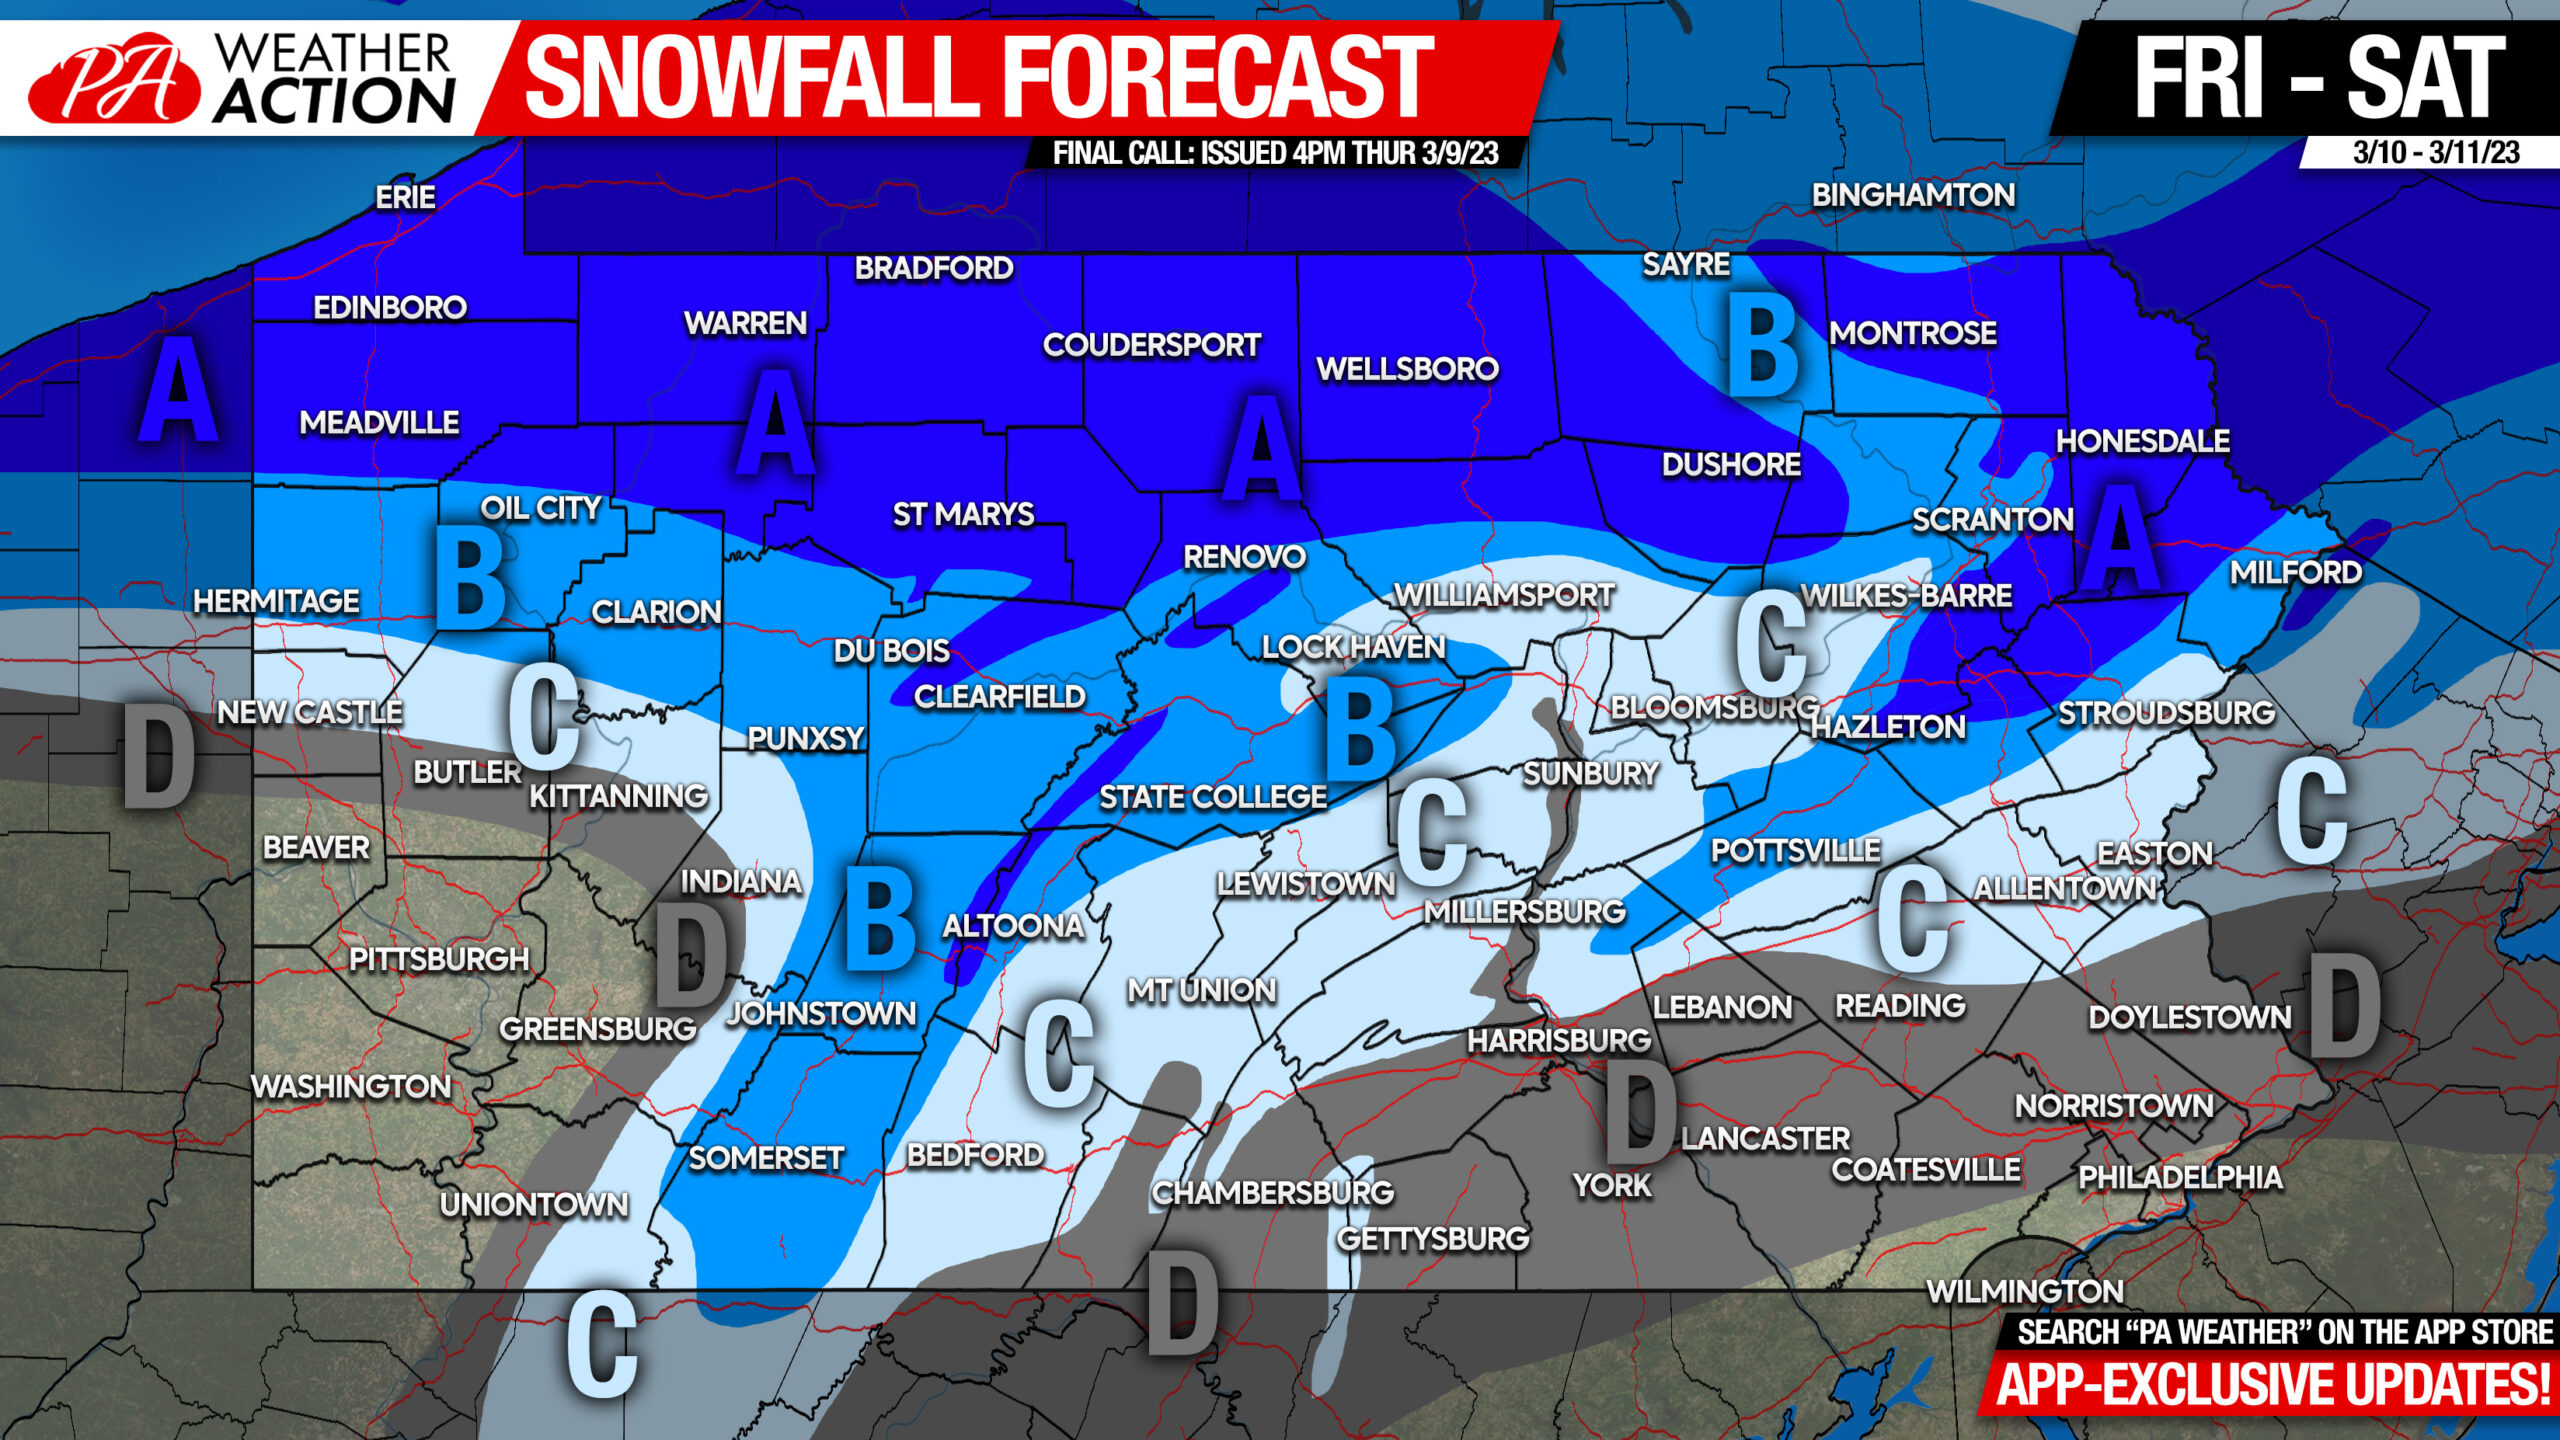 Final Call Snowfall Forecast for Friday - Saturday's Winter Storm